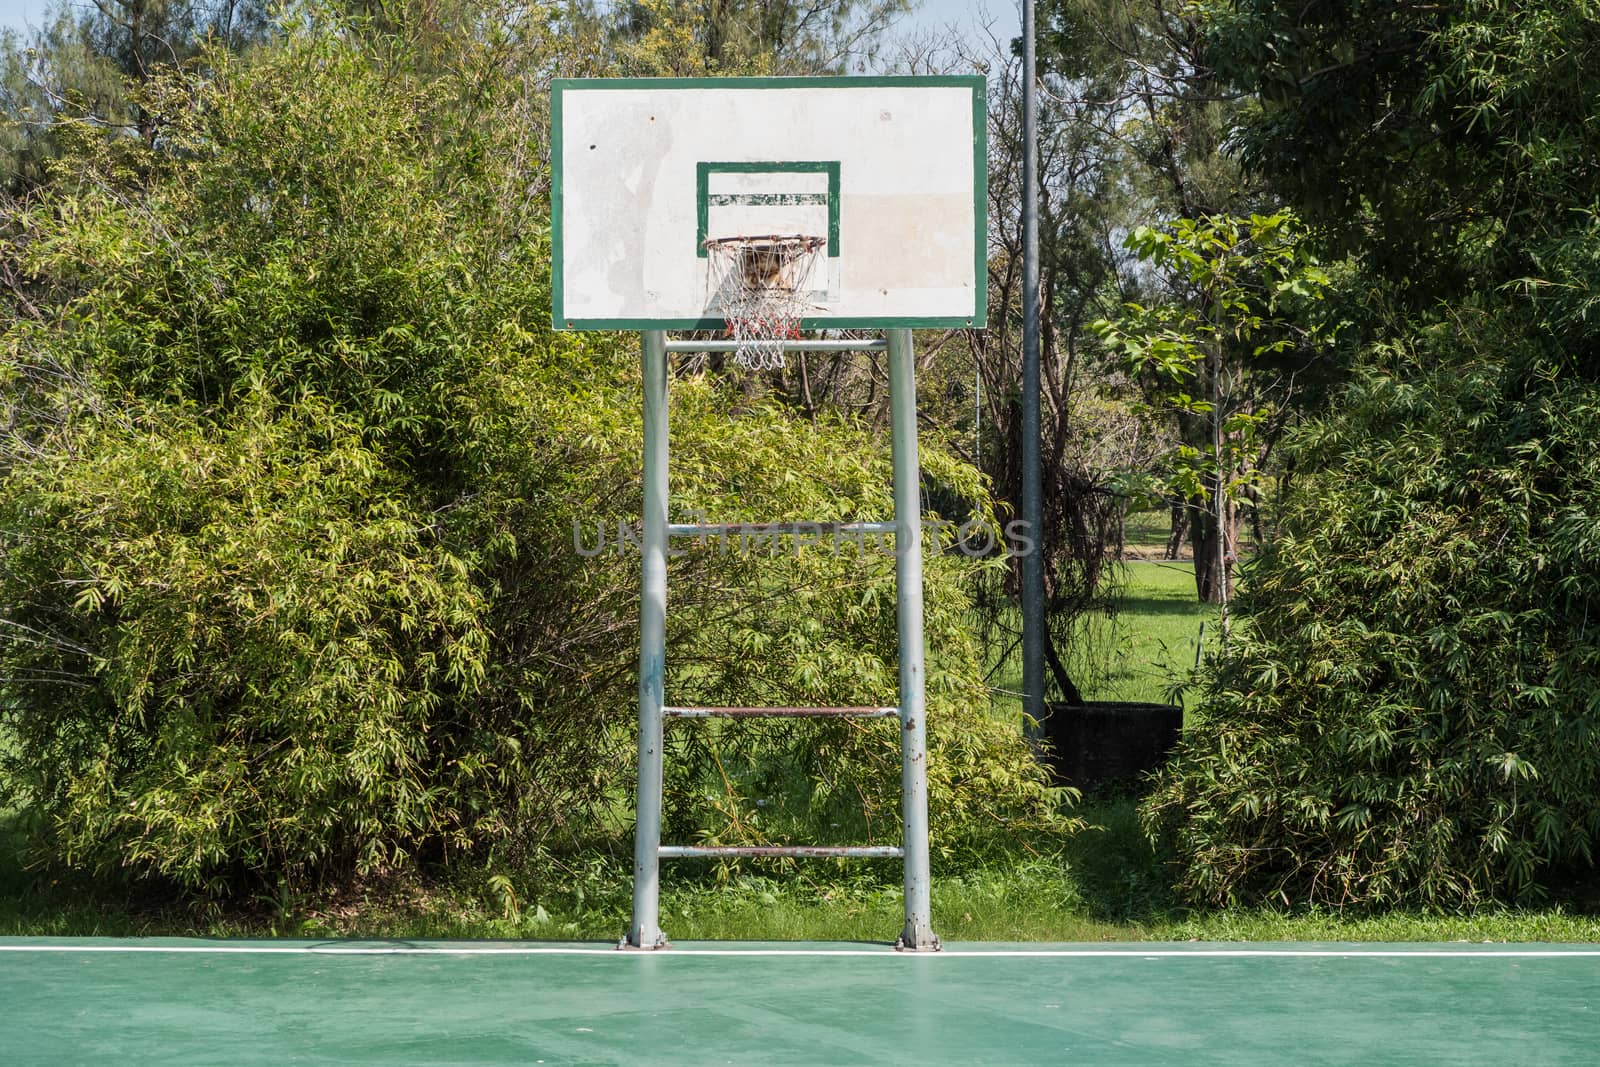 A backboard on basketball court in a park.